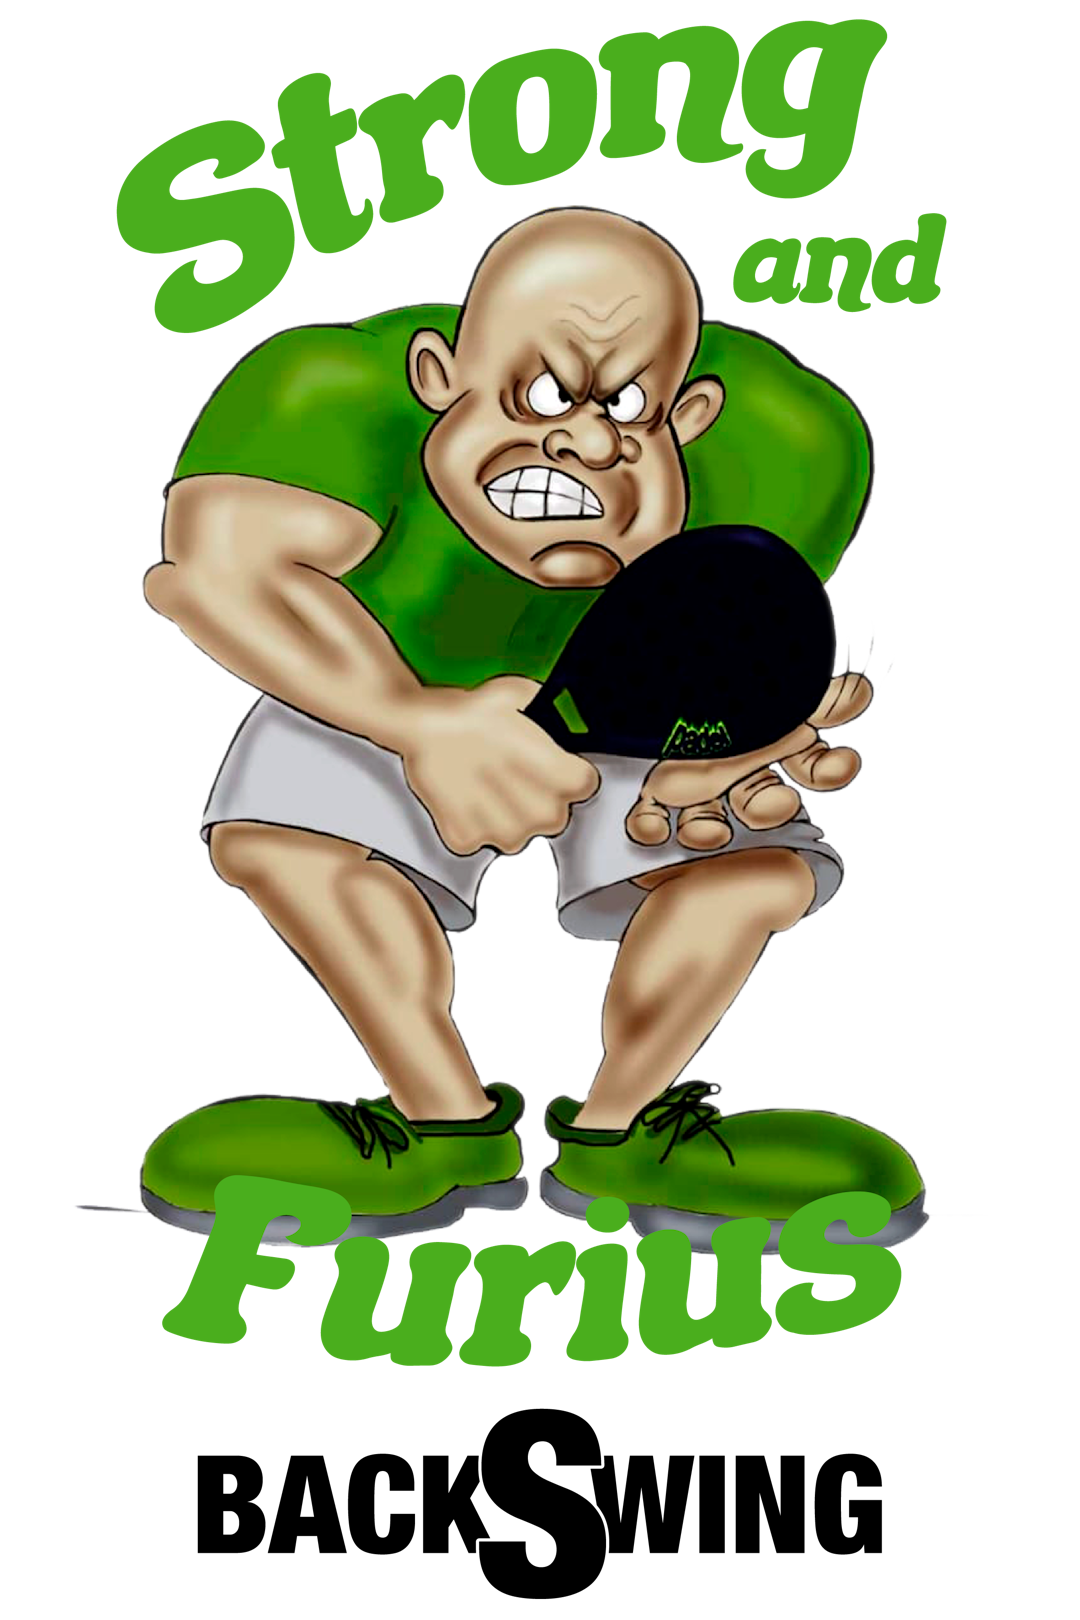 Strong and Furius